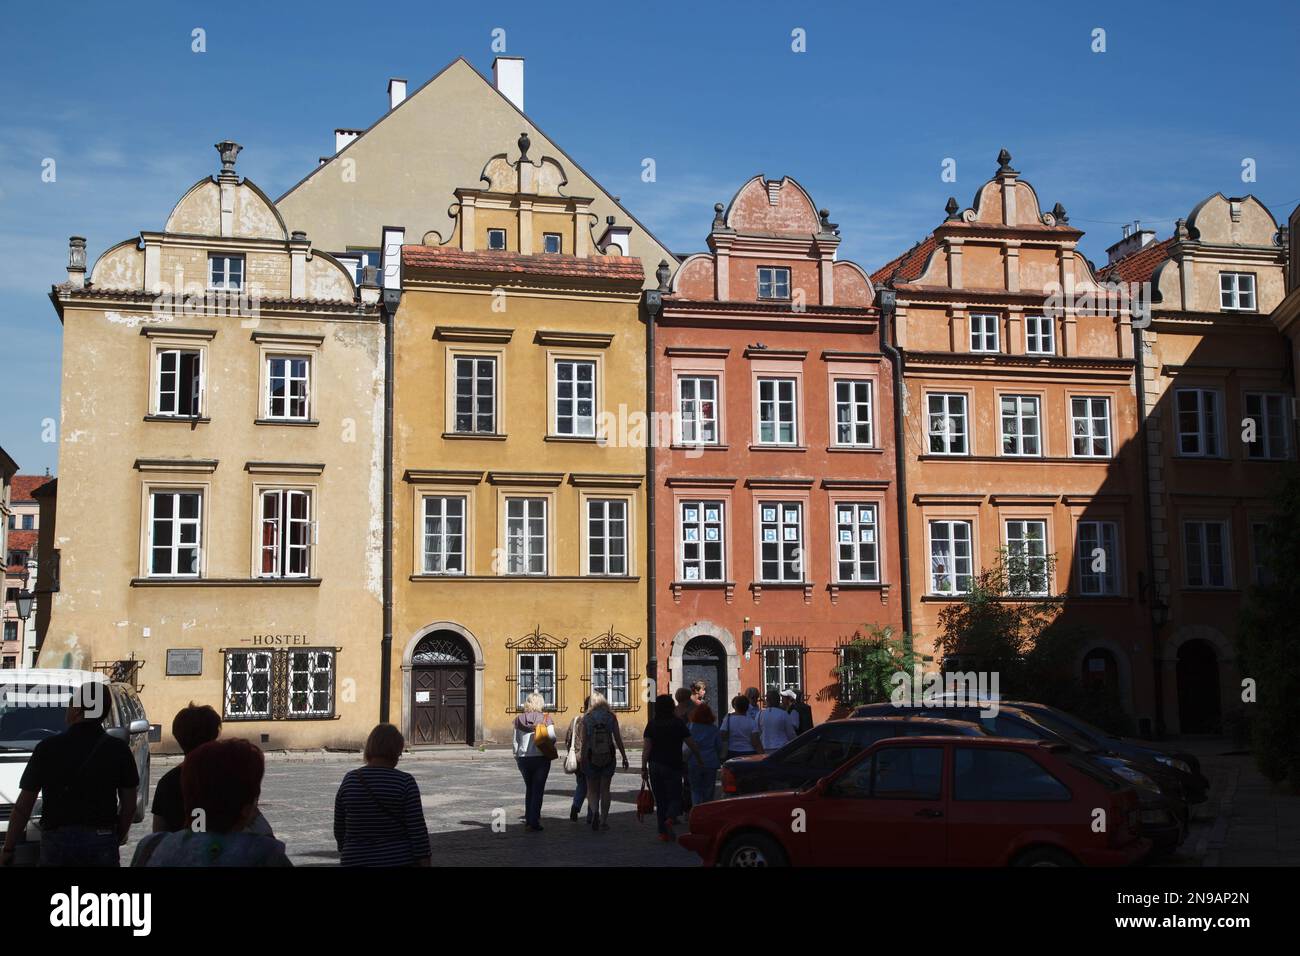 The residential buildings in Nowe Miasto town in Warsaw, Poland Stock Photo